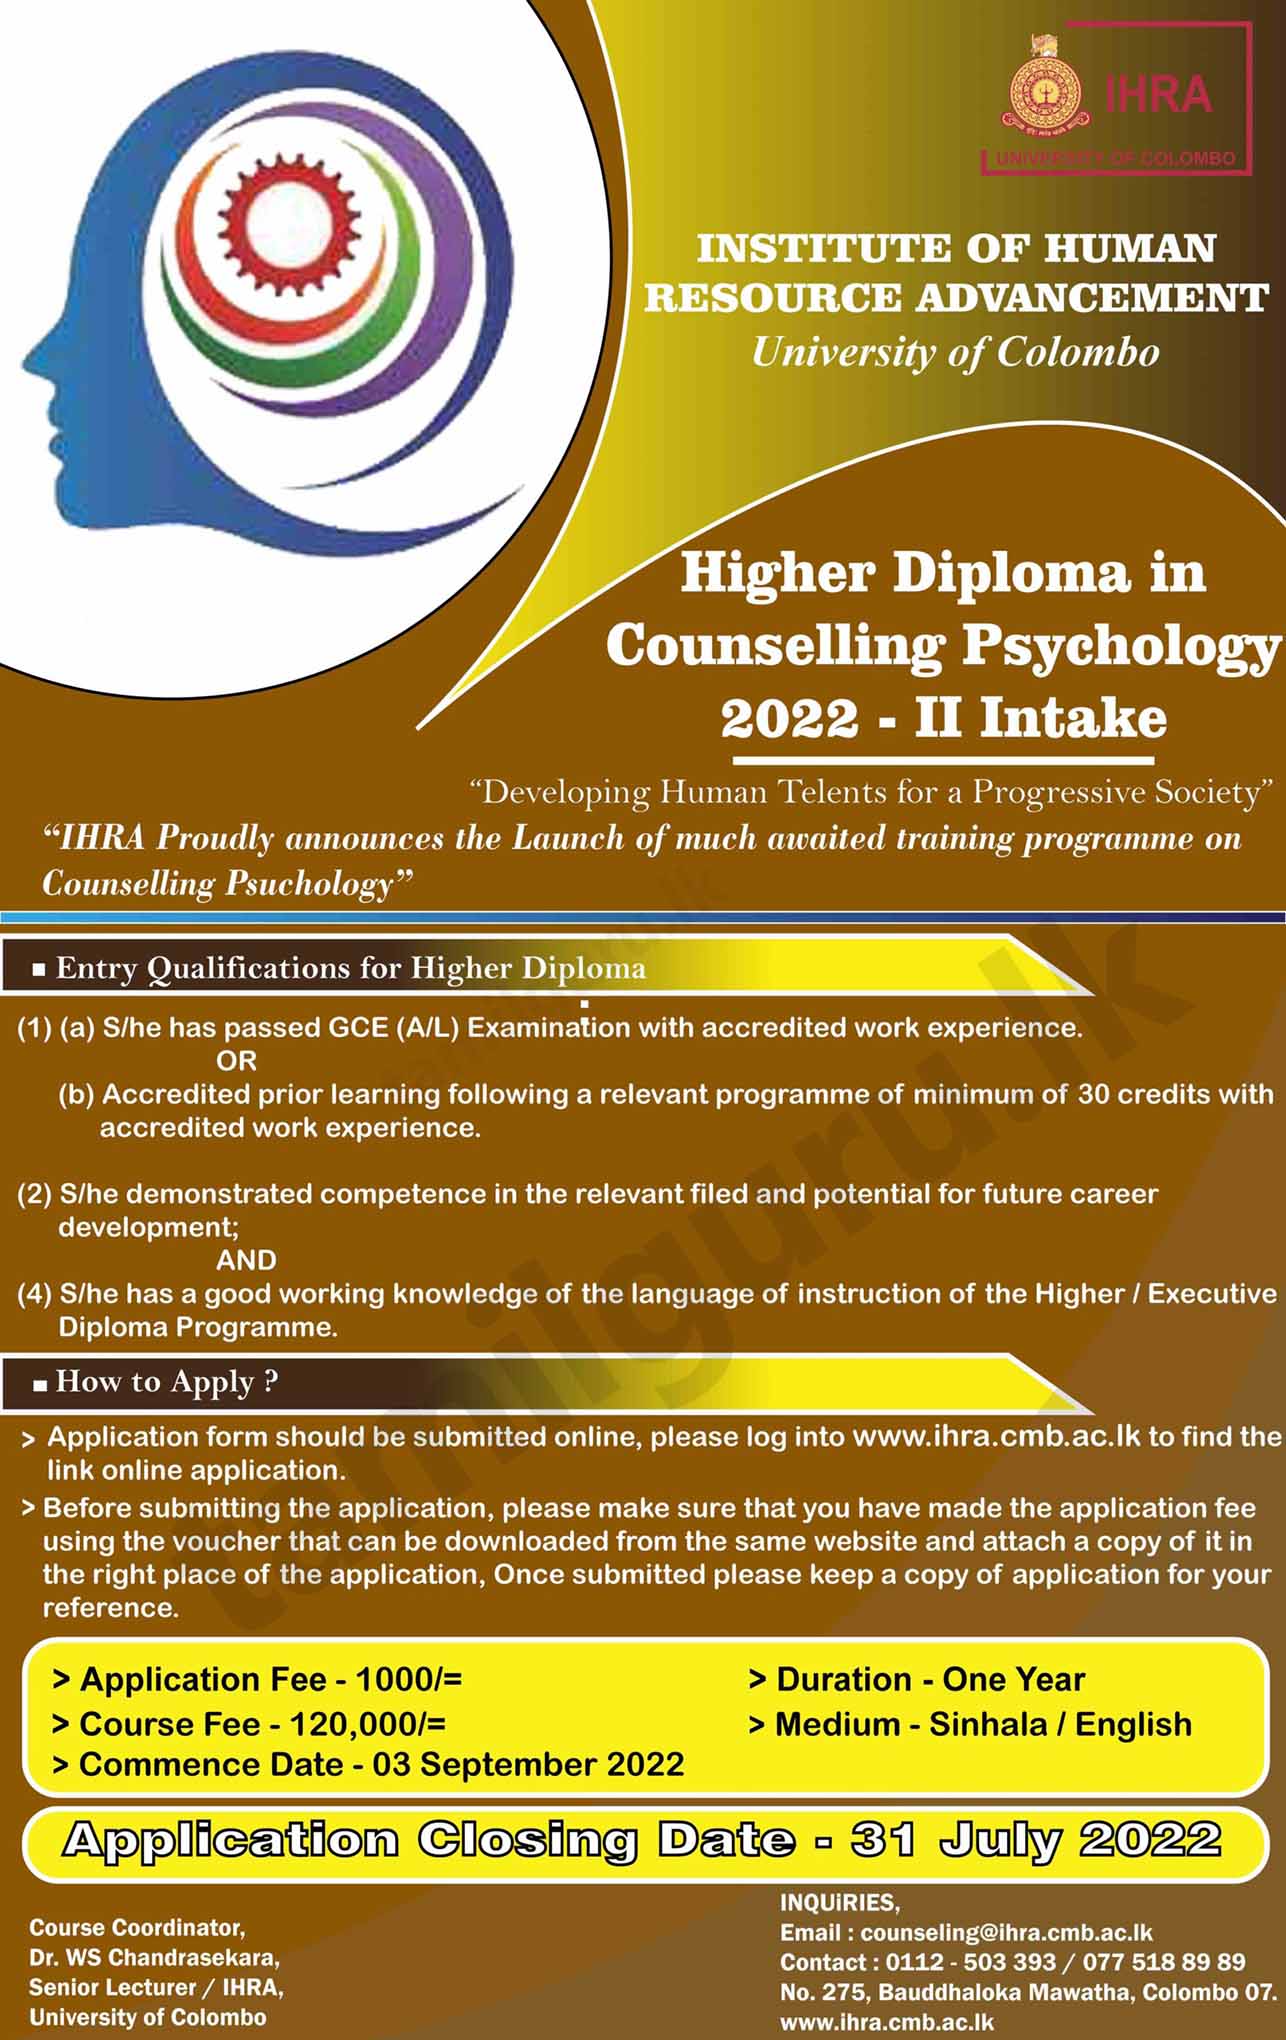 Higher Diploma in Counselling Psychology (HDCPsy) (2022 - Intake II) Conducted by the Institute of Human Resource Advancement (IHRA), University of Colombo